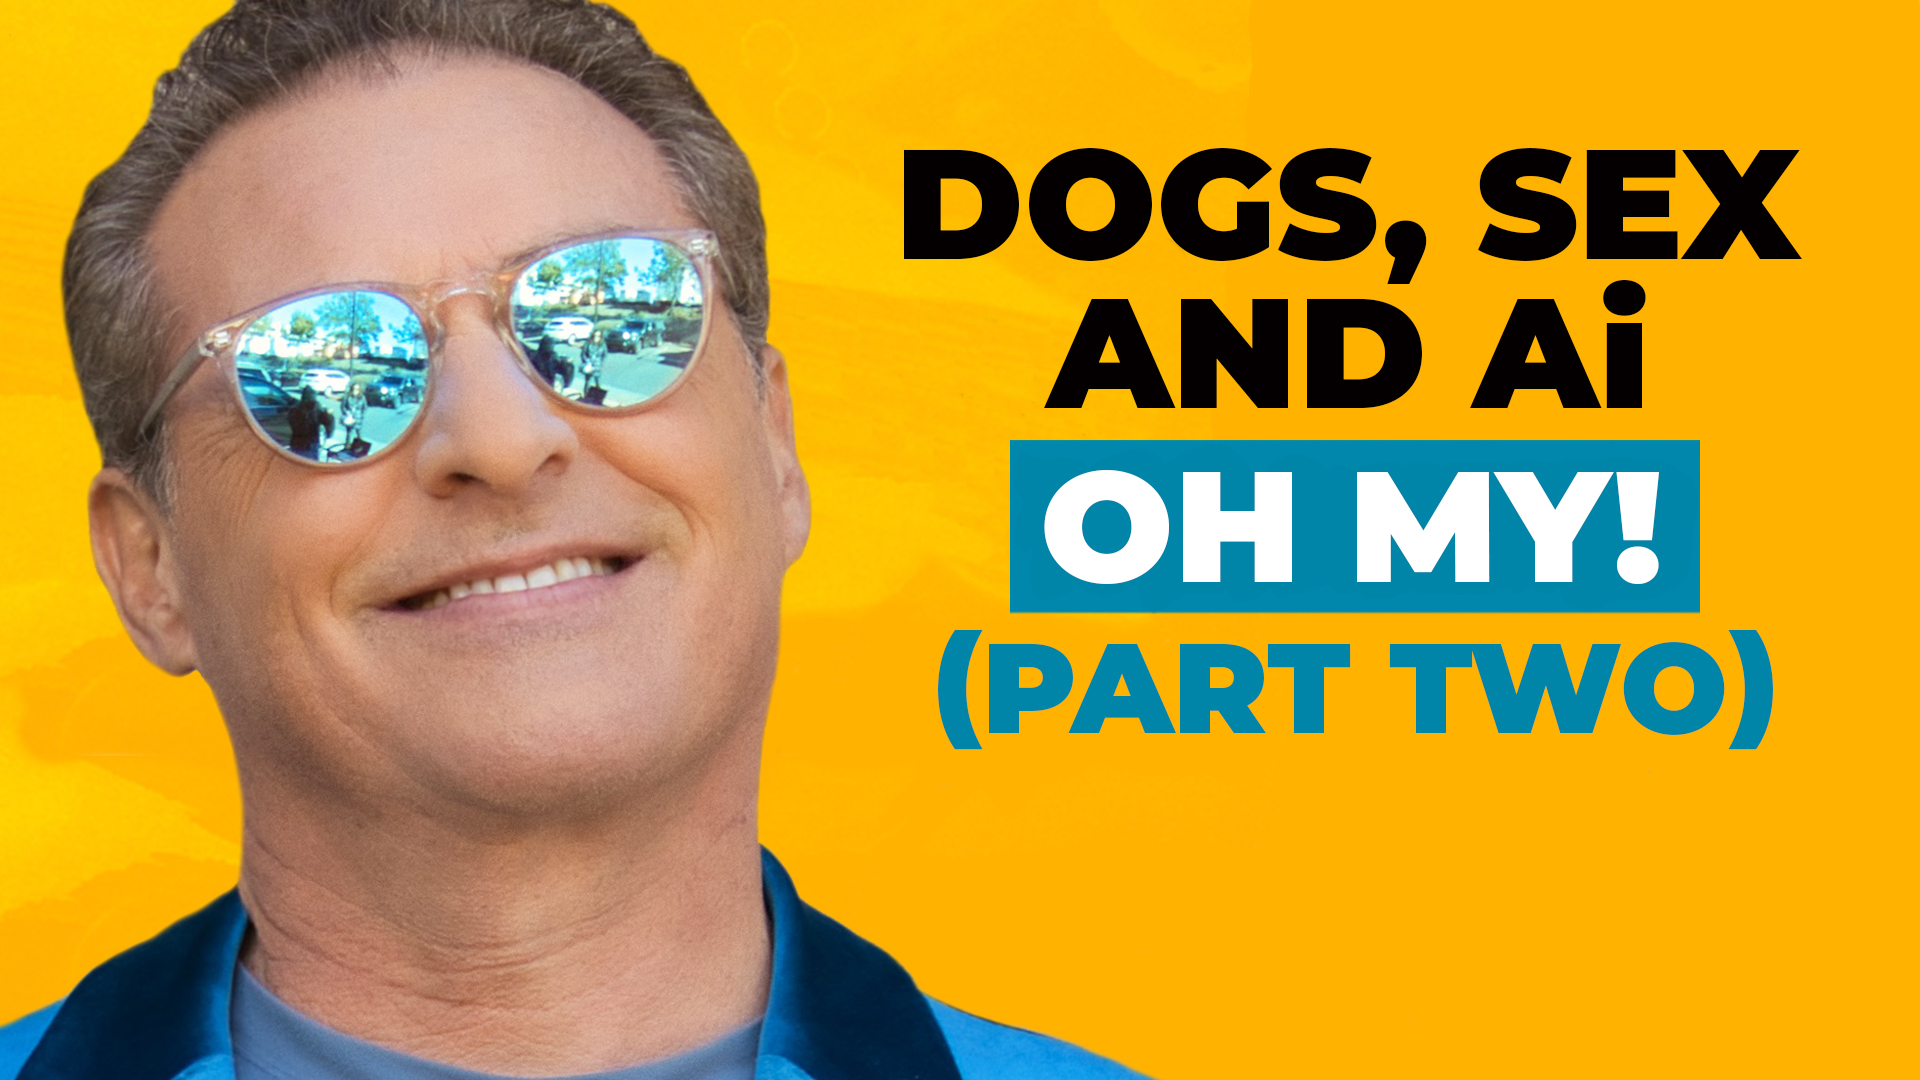 Headshot of Mike Koenigs on a bold yellow background, along with text reading "Dogs, Sex and Ai, OH MY! (Part Two)"